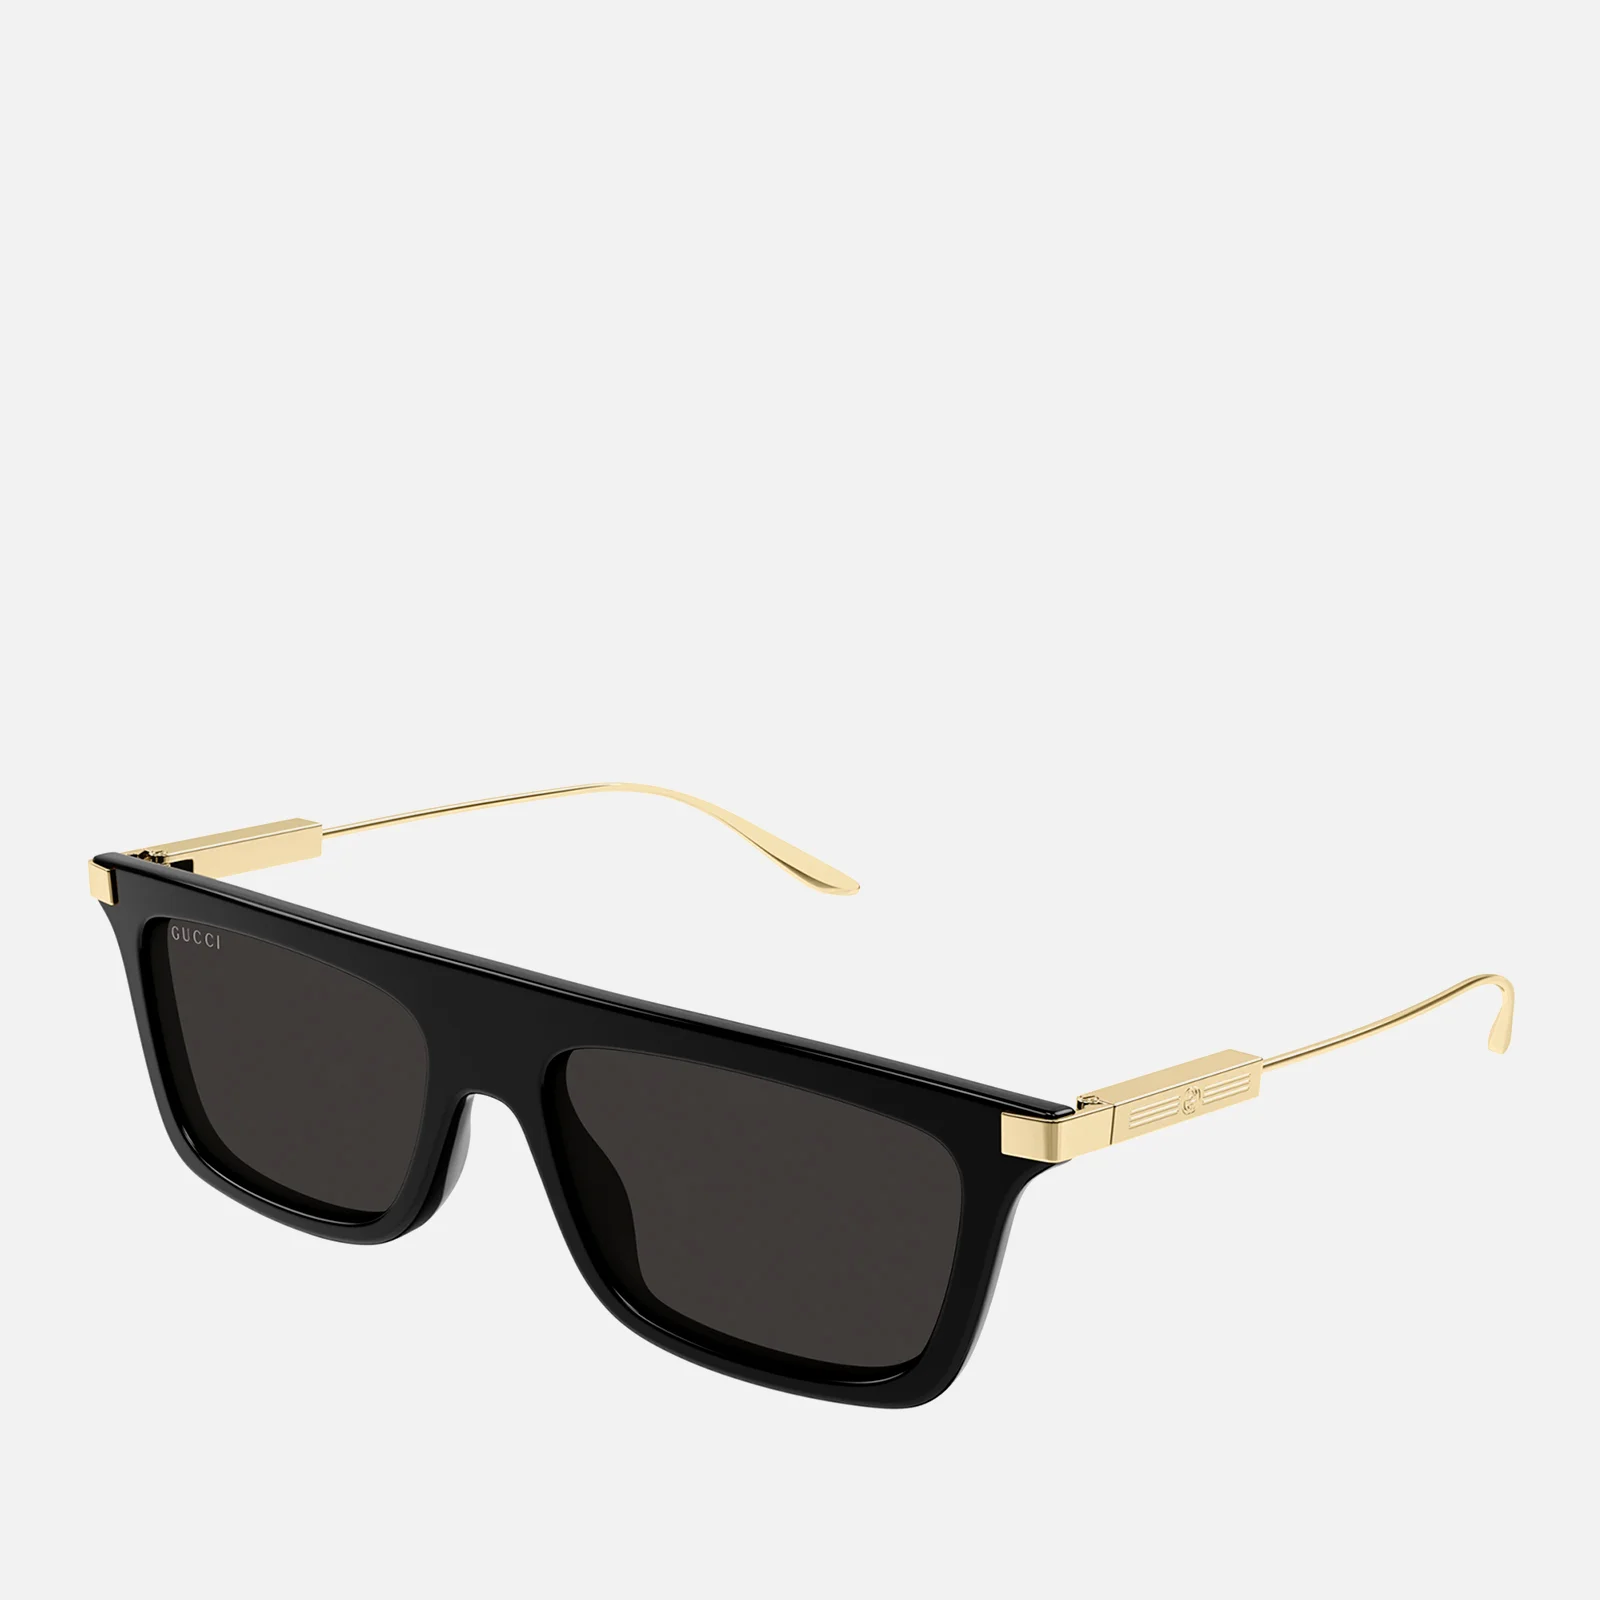 Gucci Recycled Metal and Acetate Square-Frame Sunglasses Image 1